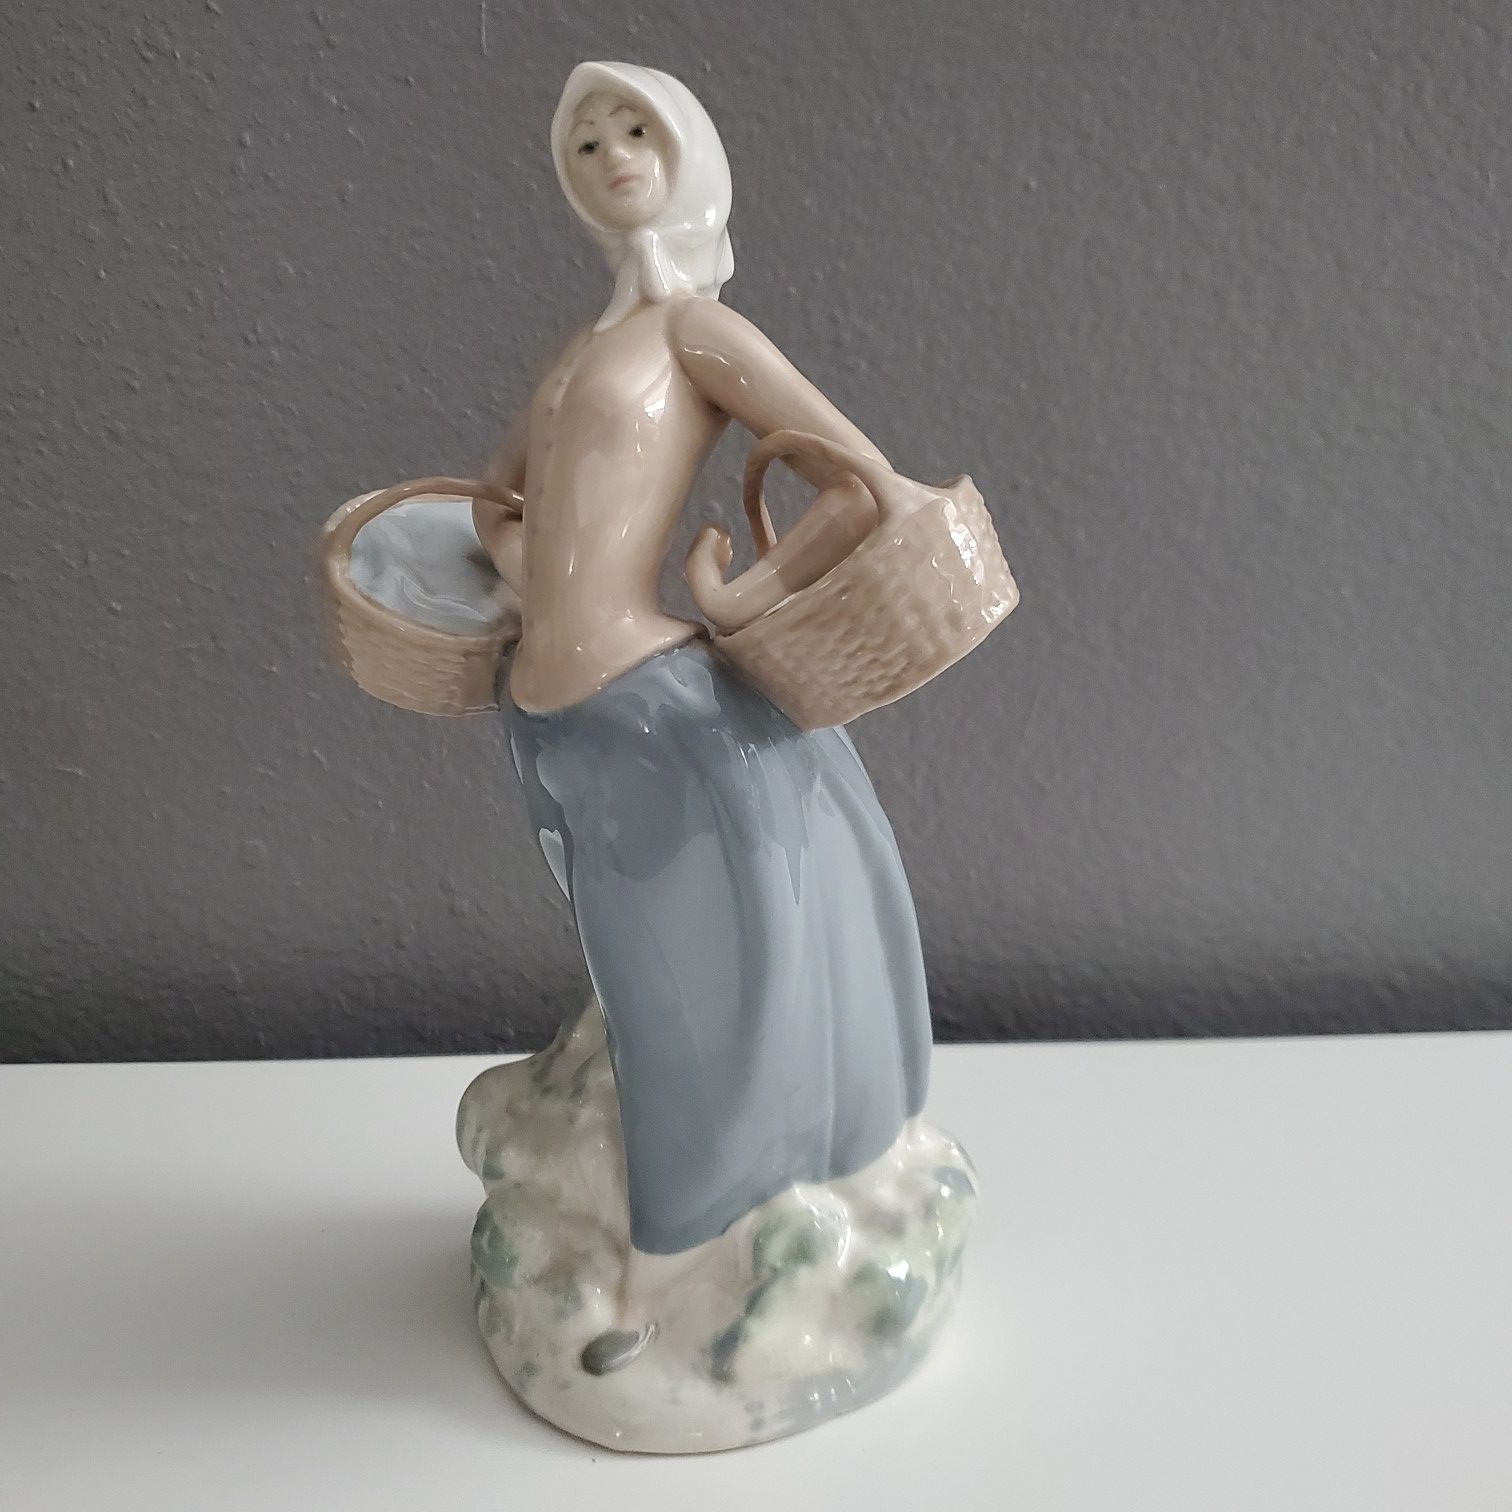 Exquisite Lladro-like porcelain figurine hand-crafted in Spain.